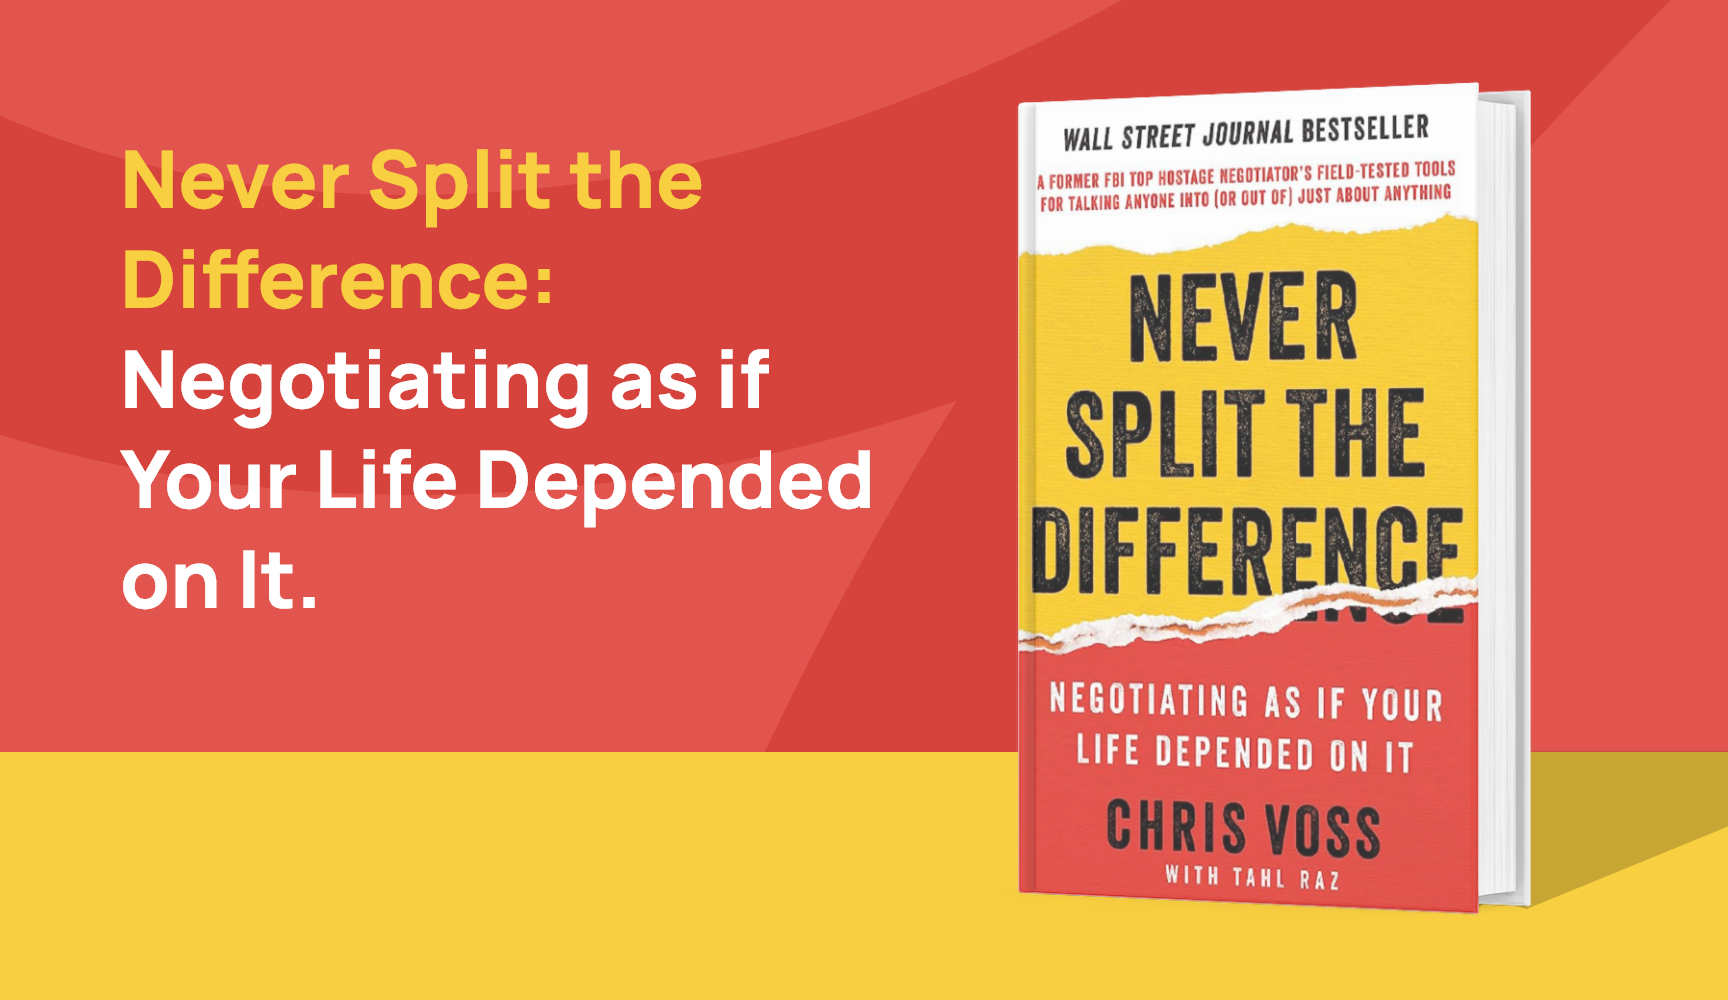 Never split the difference when negotiating as if your life depended on it. This strategy is outlined in some of the best Ecommerce books available.